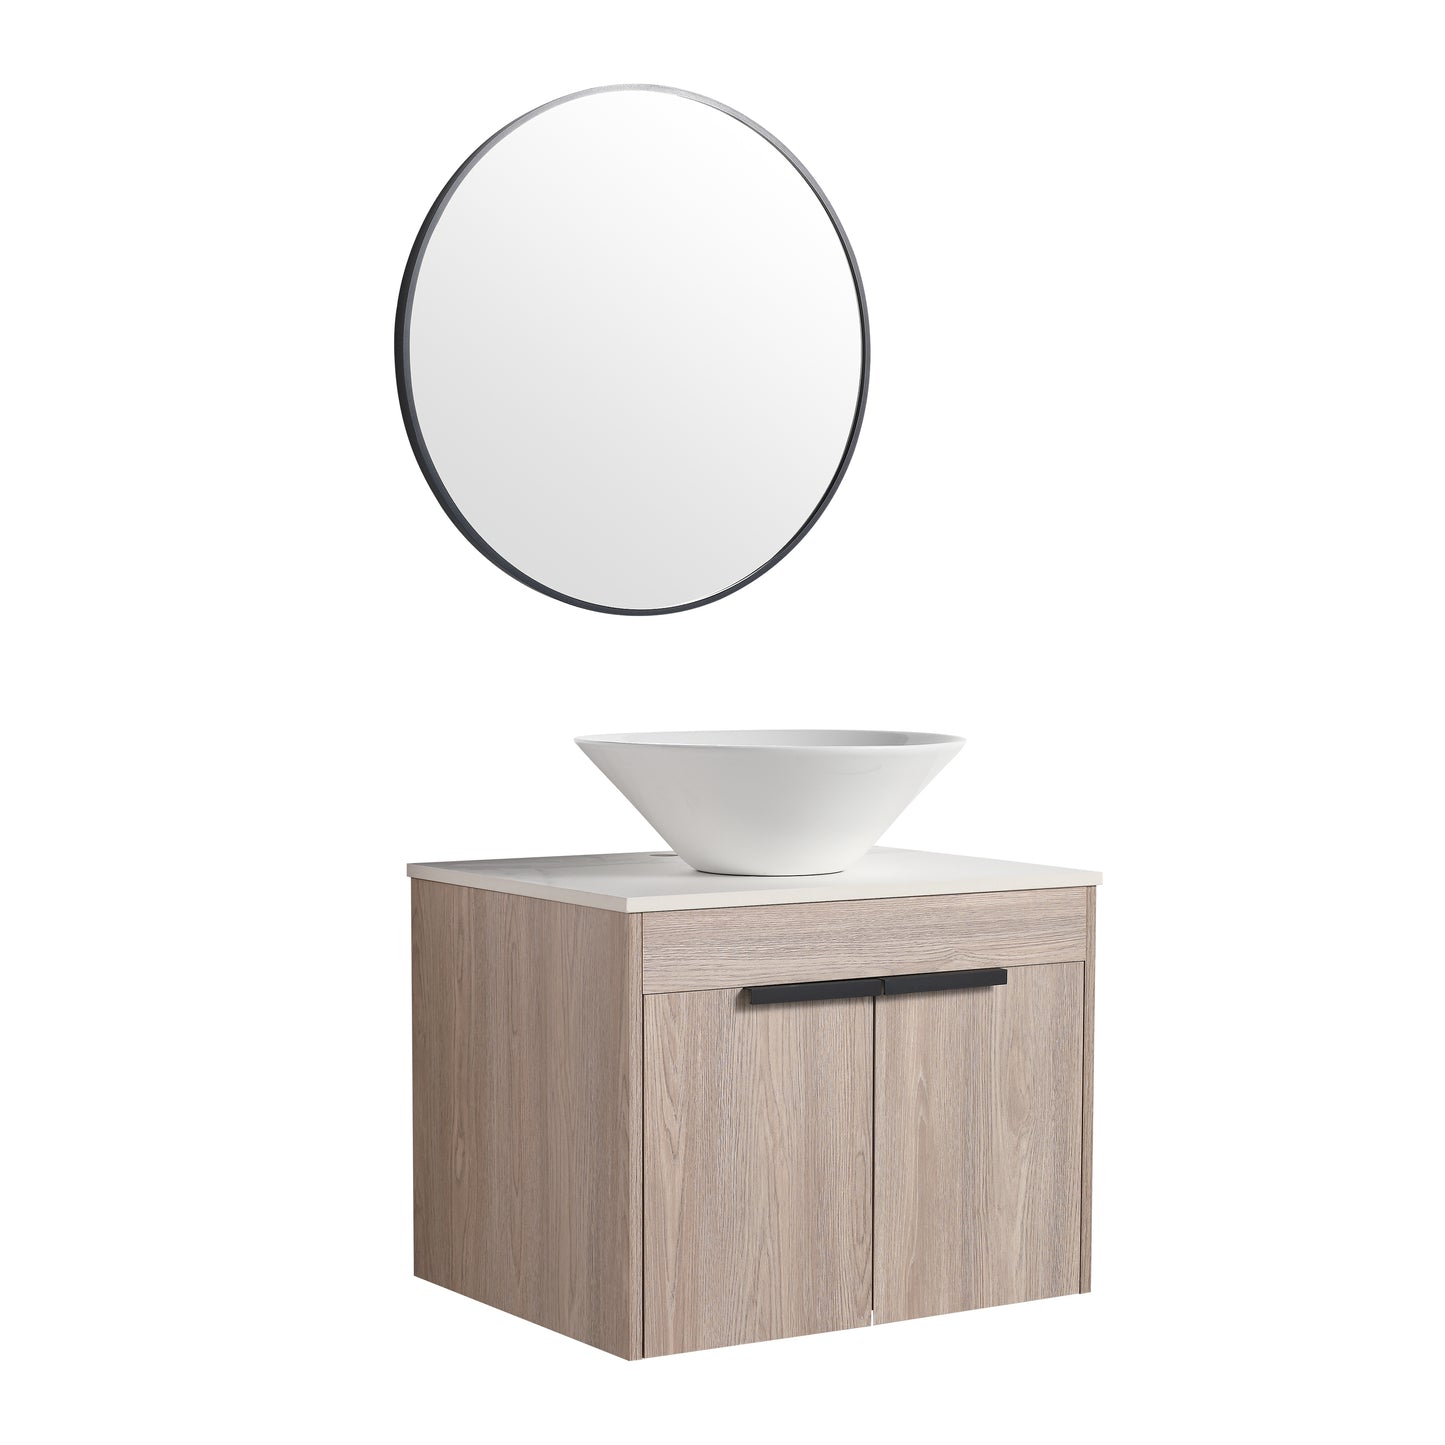 24 " Modern Design Float Bathroom Vanity With Ceramic Basin Set,  Wall Mounted White Oak Vanity  With Soft Close Door,KD-Packing，KD-Packing，2 Pieces Parcel（TOP-BAB217MOWH）